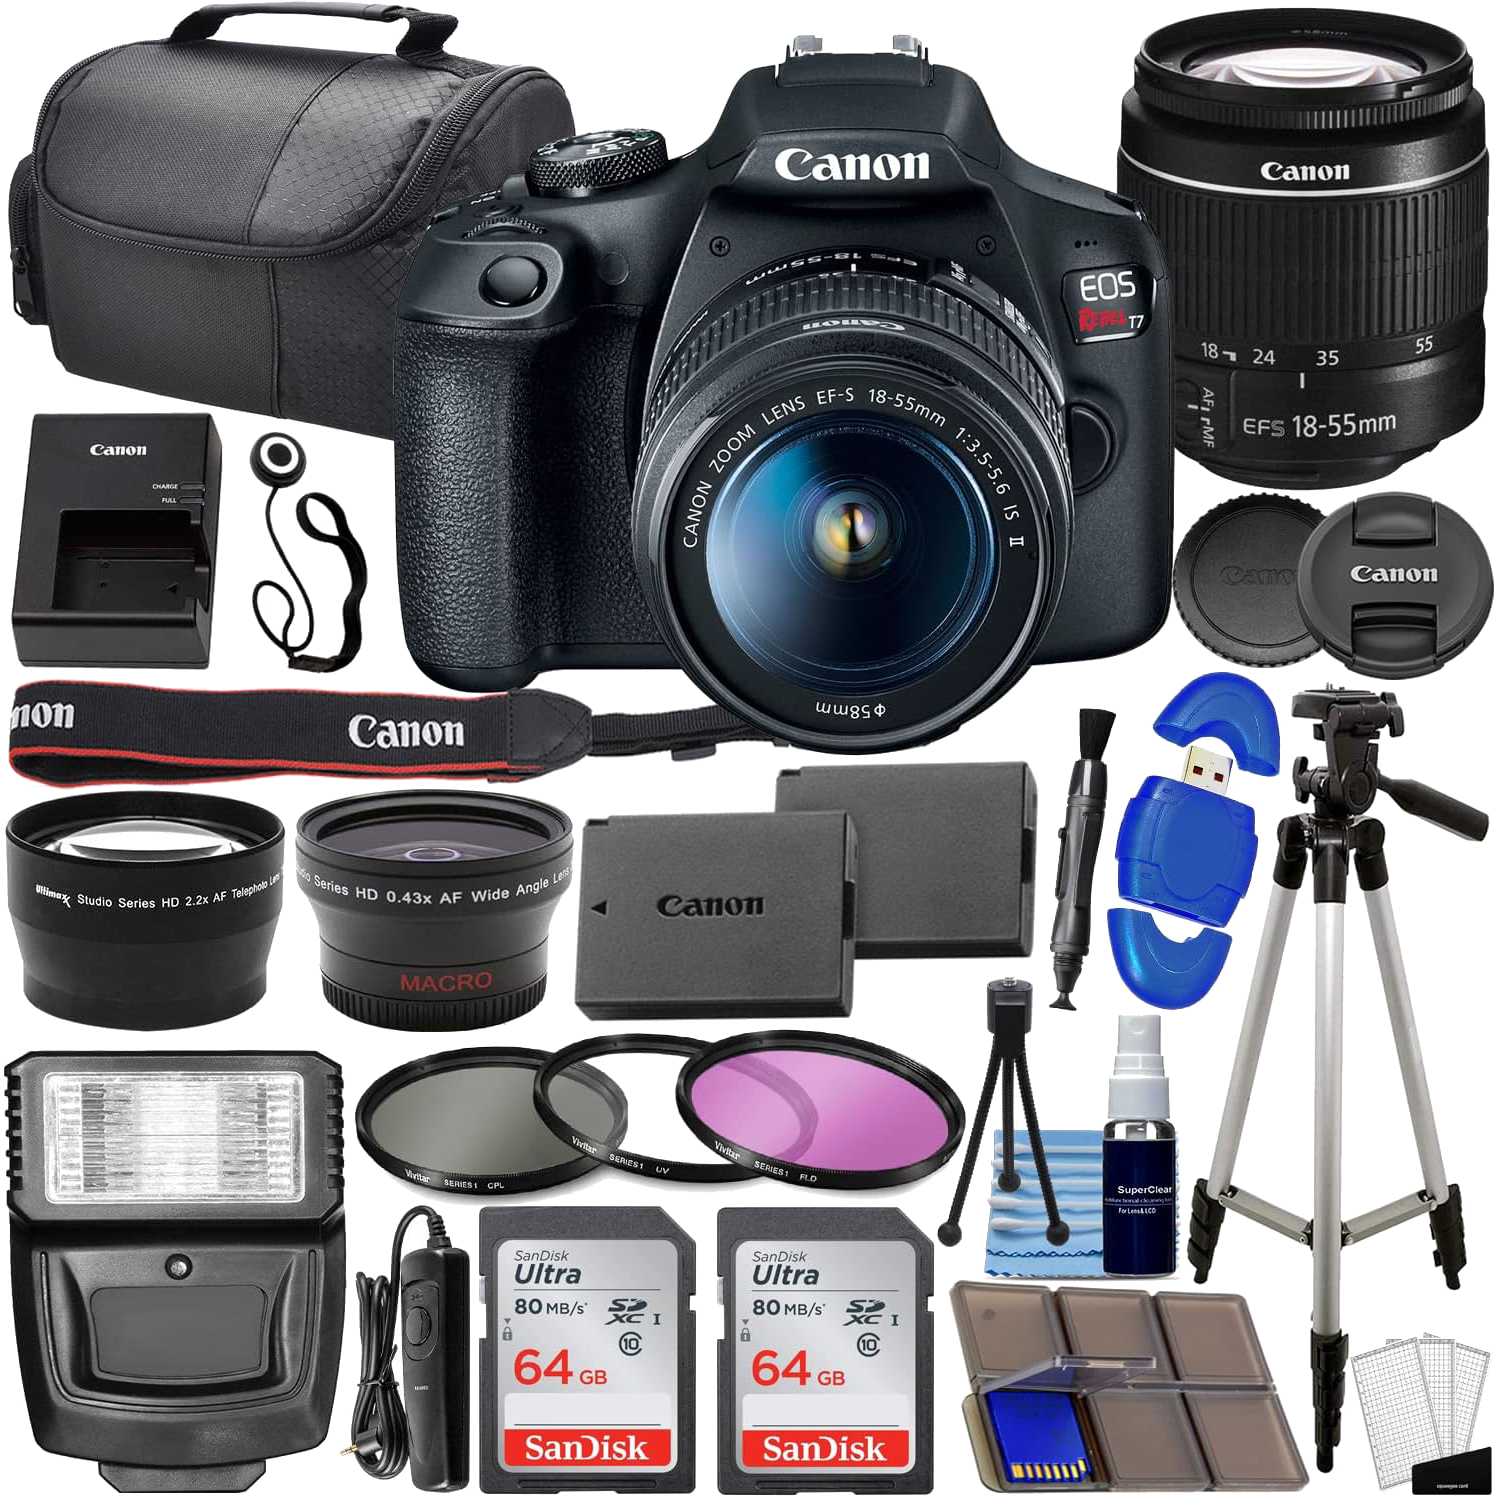 Canon EOS Rebel T7 DSLR Camera Bundle w Canon EF-S 18-55mm f3.5-5.6 is II Lens + 2pc SanDisk 64GB Memory Cards, Wide Angle Lens, Telephoto Lens, 3pc Filter Kit + Accessory Kit